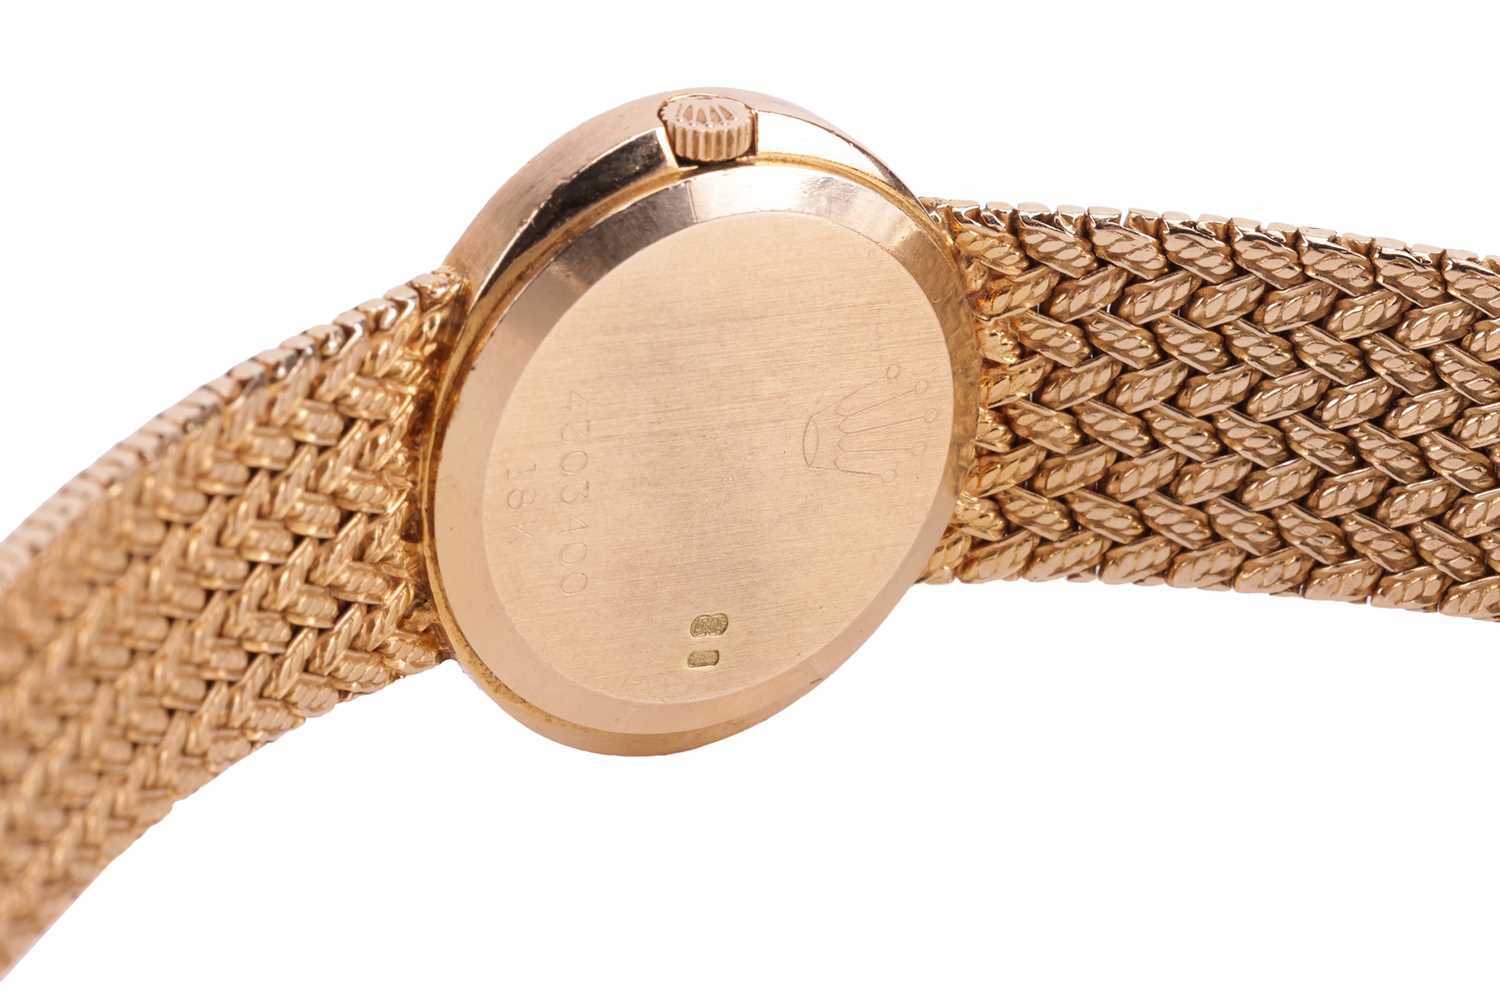 An 18ct gold Rolex Cellini ladies wristwatch, featuring a champagne face with gilded hands, set in a - Image 6 of 8